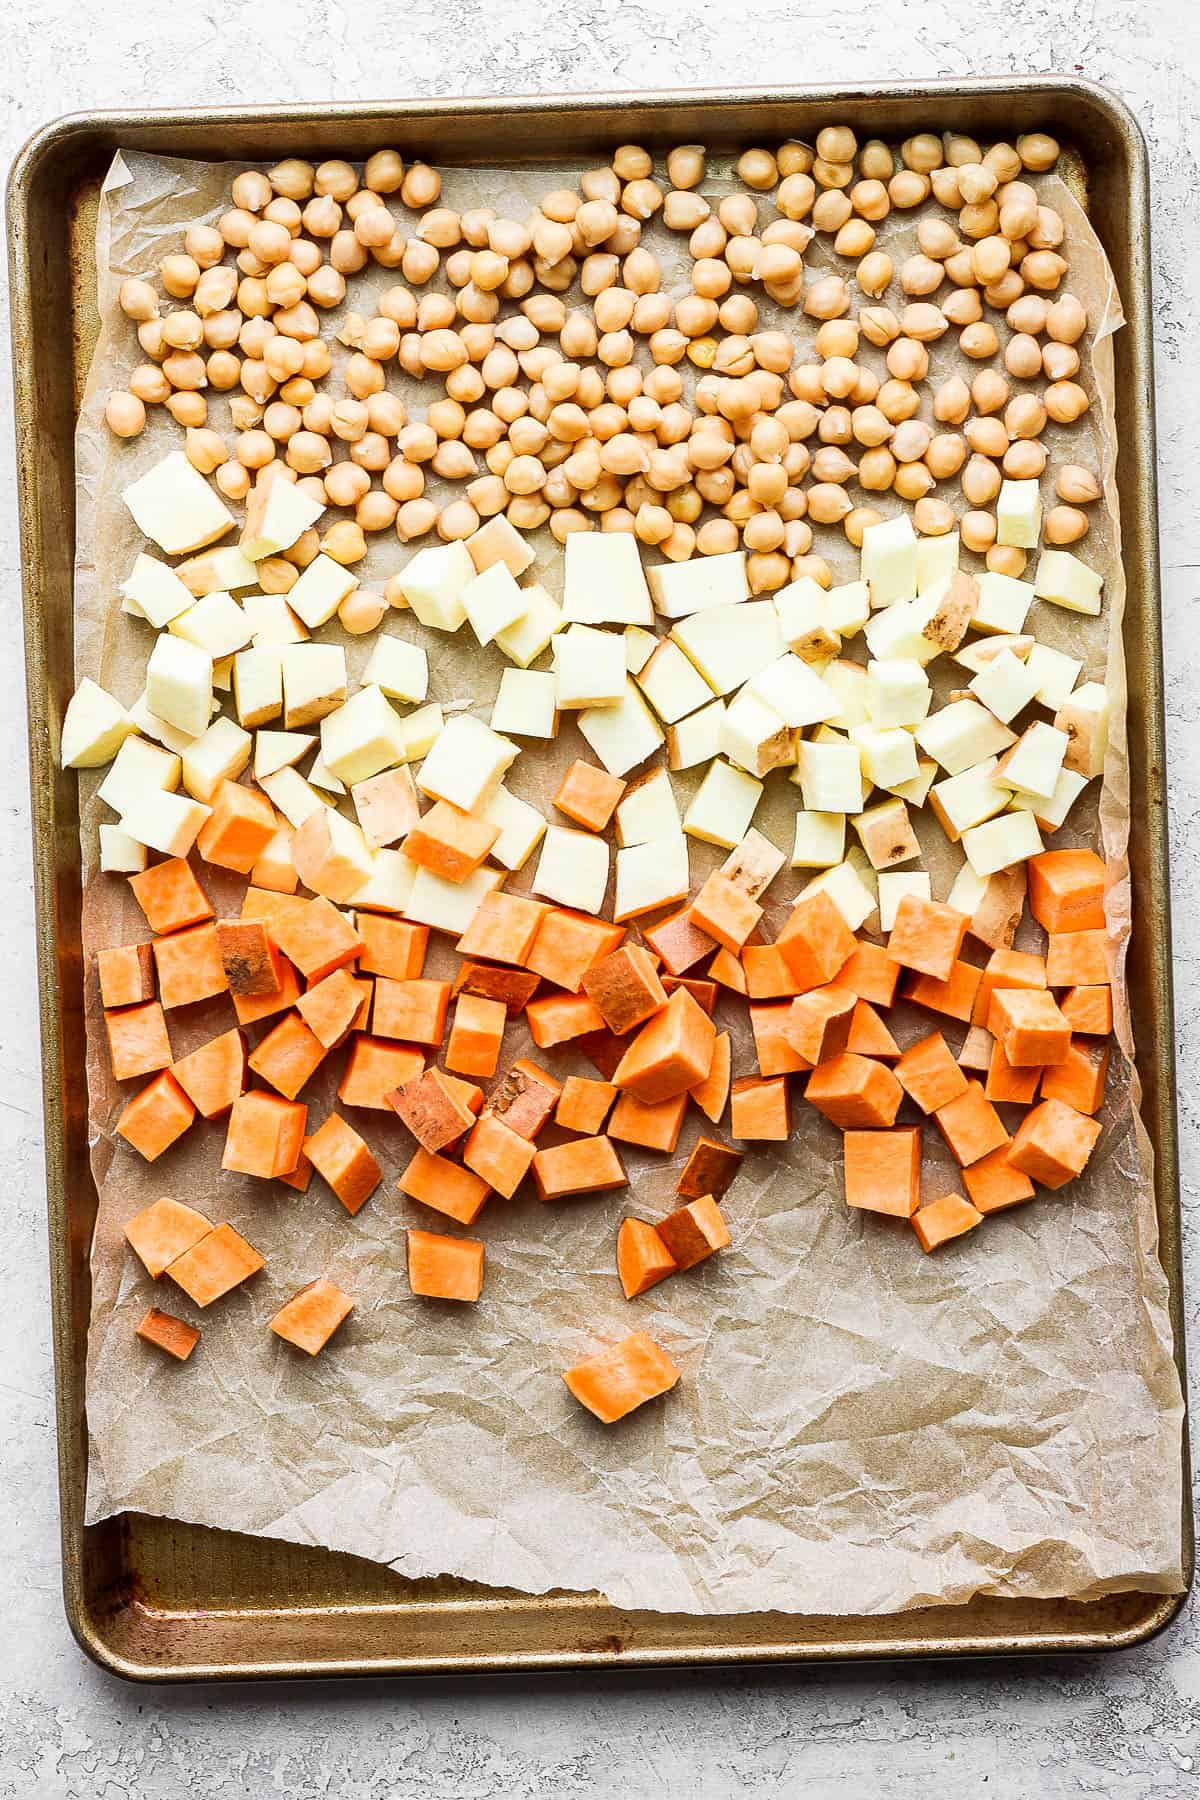 Chickpeas, cubed white sweet potato, and cubed yams on a baking sheet lined with parchment paper. 